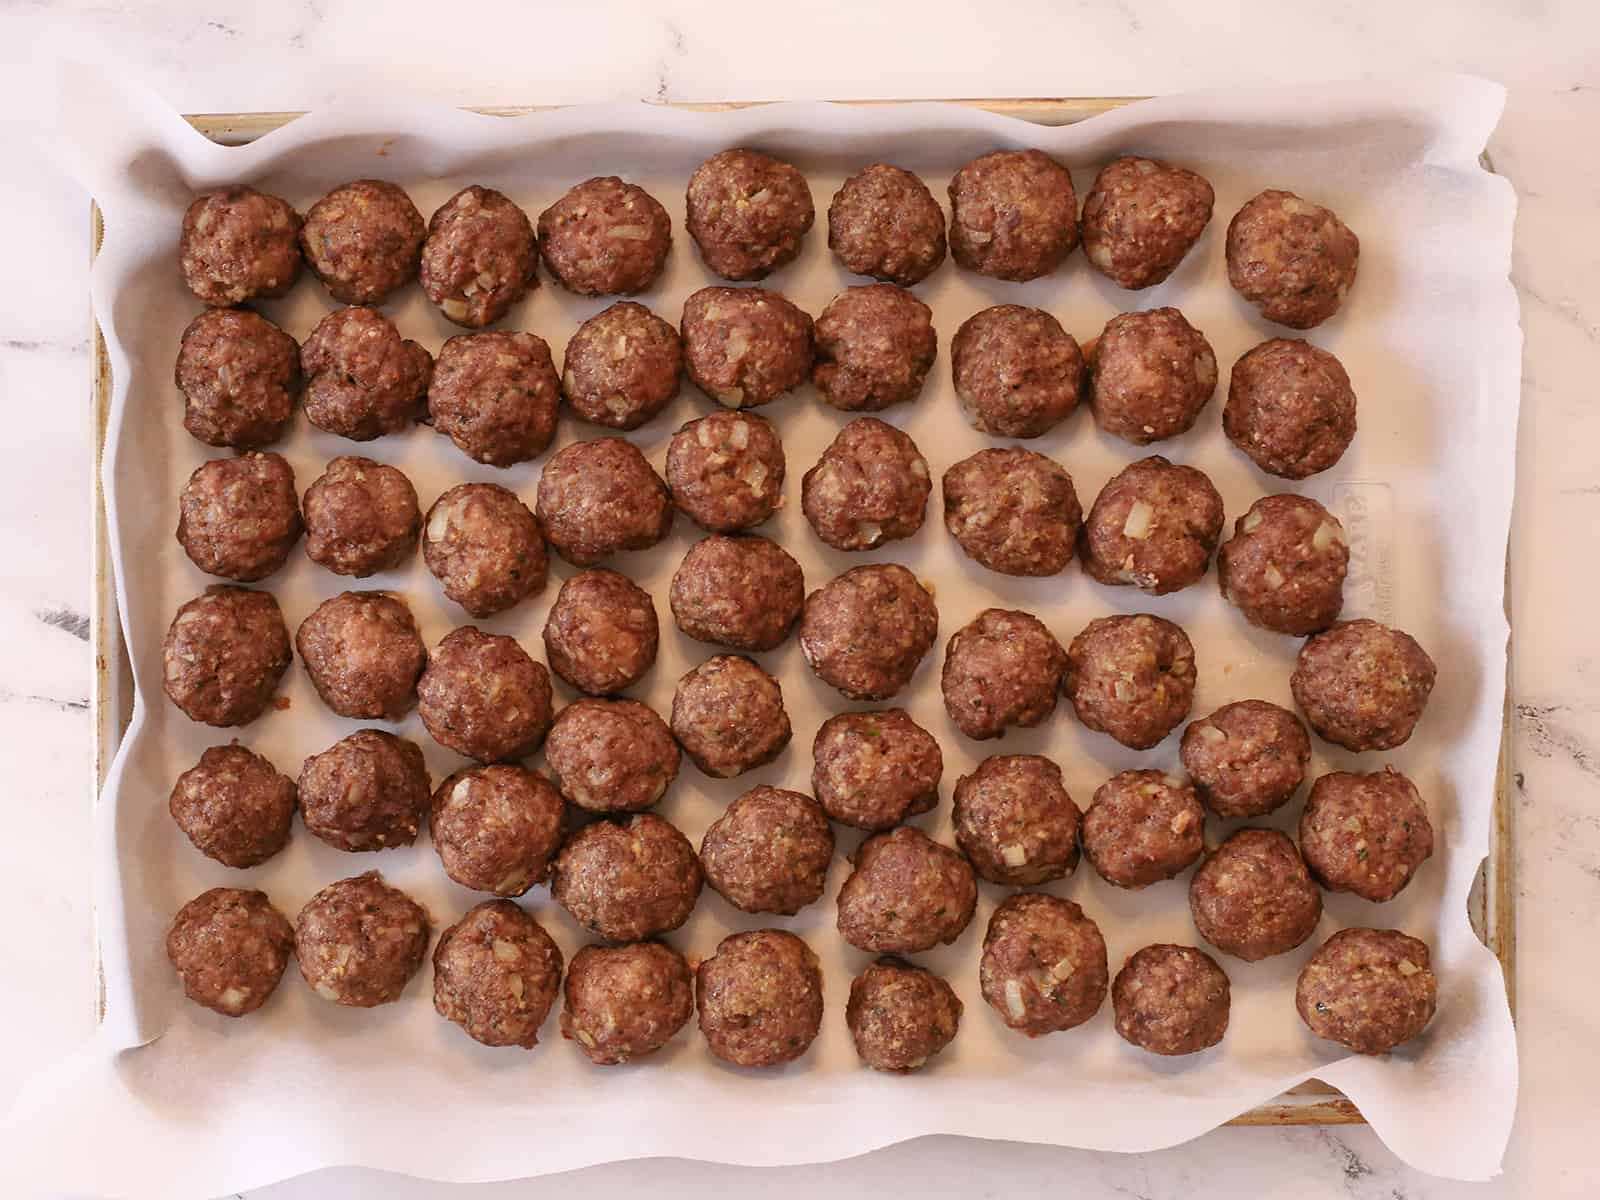 Meatballs on parchment paper on a tray, ready for the freezer.